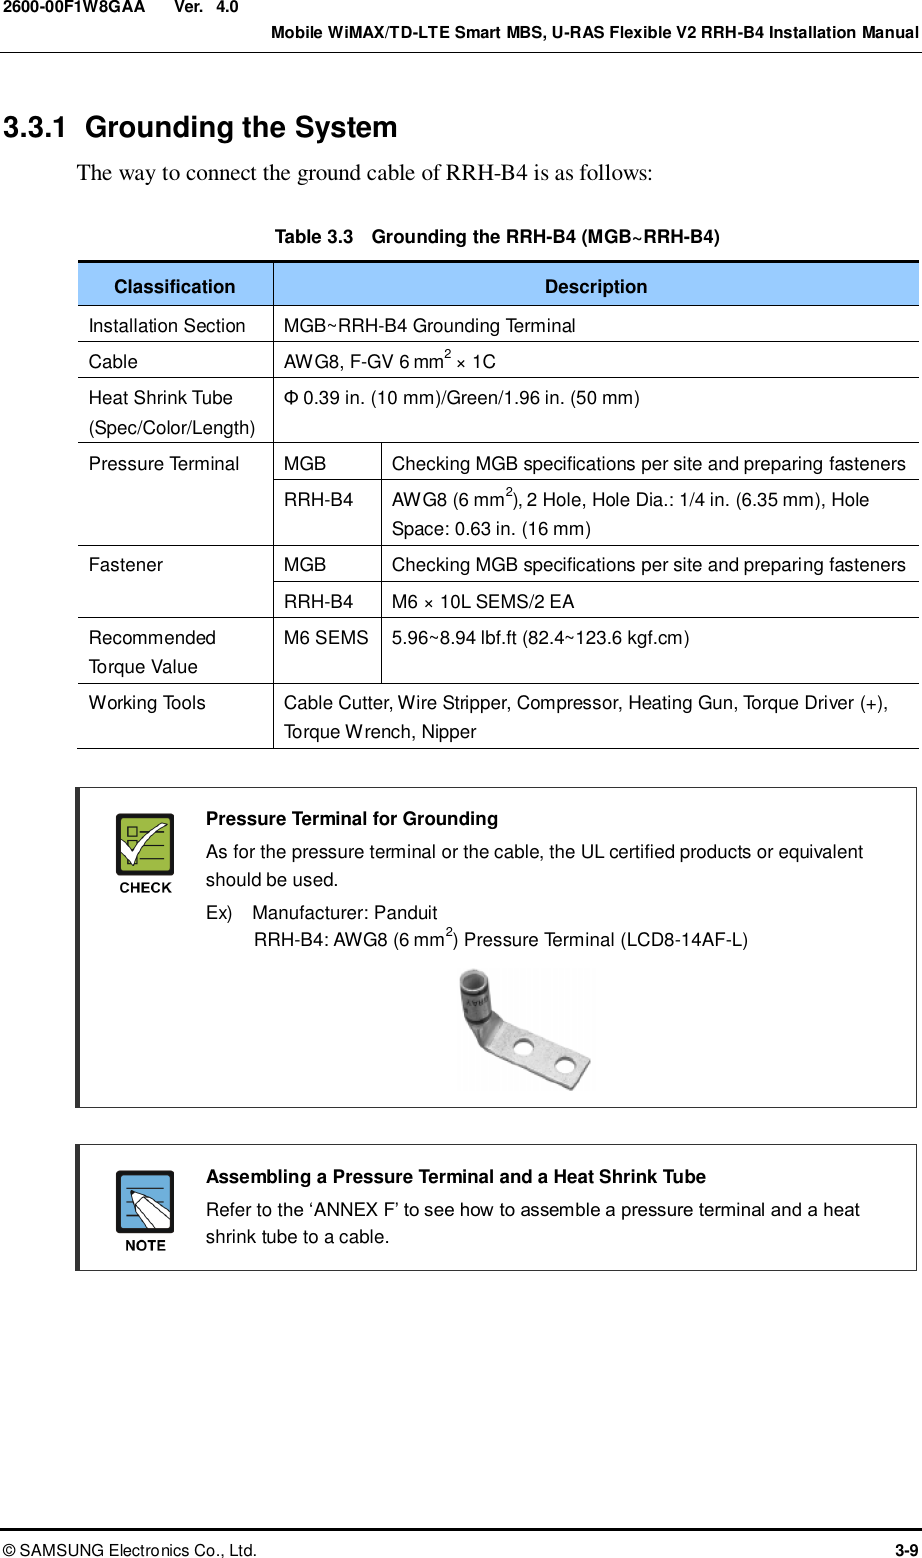  Ver.    Mobile WiMAX/TD-LTE Smart MBS, U-RAS Flexible V2 RRH-B4 Installation Manual ©  SAMSUNG Electronics Co., Ltd.  3-9 2600-00F1W8GAA 4.0 3.3.1  Grounding the System The way to connect the ground cable of RRH-B4 is as follows:  Table 3.3    Grounding the RRH-B4 (MGB~RRH-B4) Classification Description Installation Section MGB~RRH-B4 Grounding Terminal Cable AWG8, F-GV 6 mm2 × 1C Heat Shrink Tube (Spec/Color/Length) Φ 0.39 in. (10 mm)/Green/1.96 in. (50 mm) Pressure Terminal MGB Checking MGB specifications per site and preparing fasteners RRH-B4 AWG8 (6 mm2), 2 Hole, Hole Dia.: 1/4 in. (6.35 mm), Hole Space: 0.63 in. (16 mm) Fastener MGB Checking MGB specifications per site and preparing fasteners RRH-B4 M6 × 10L SEMS/2 EA Recommended Torque Value M6 SEMS 5.96~8.94 lbf.ft (82.4~123.6 kgf.cm) Working Tools Cable Cutter, Wire Stripper, Compressor, Heating Gun, Torque Driver (+), Torque Wrench, Nipper   Pressure Terminal for Grounding   As for the pressure terminal or the cable, the UL certified products or equivalent should be used.   Ex)    Manufacturer: Panduit RRH-B4: AWG8 (6 mm2) Pressure Terminal (LCD8-14AF-L)       Assembling a Pressure Terminal and a Heat Shrink Tube   Refer to the ‘ANNEX F’ to see how to assemble a pressure terminal and a heat shrink tube to a cable.  